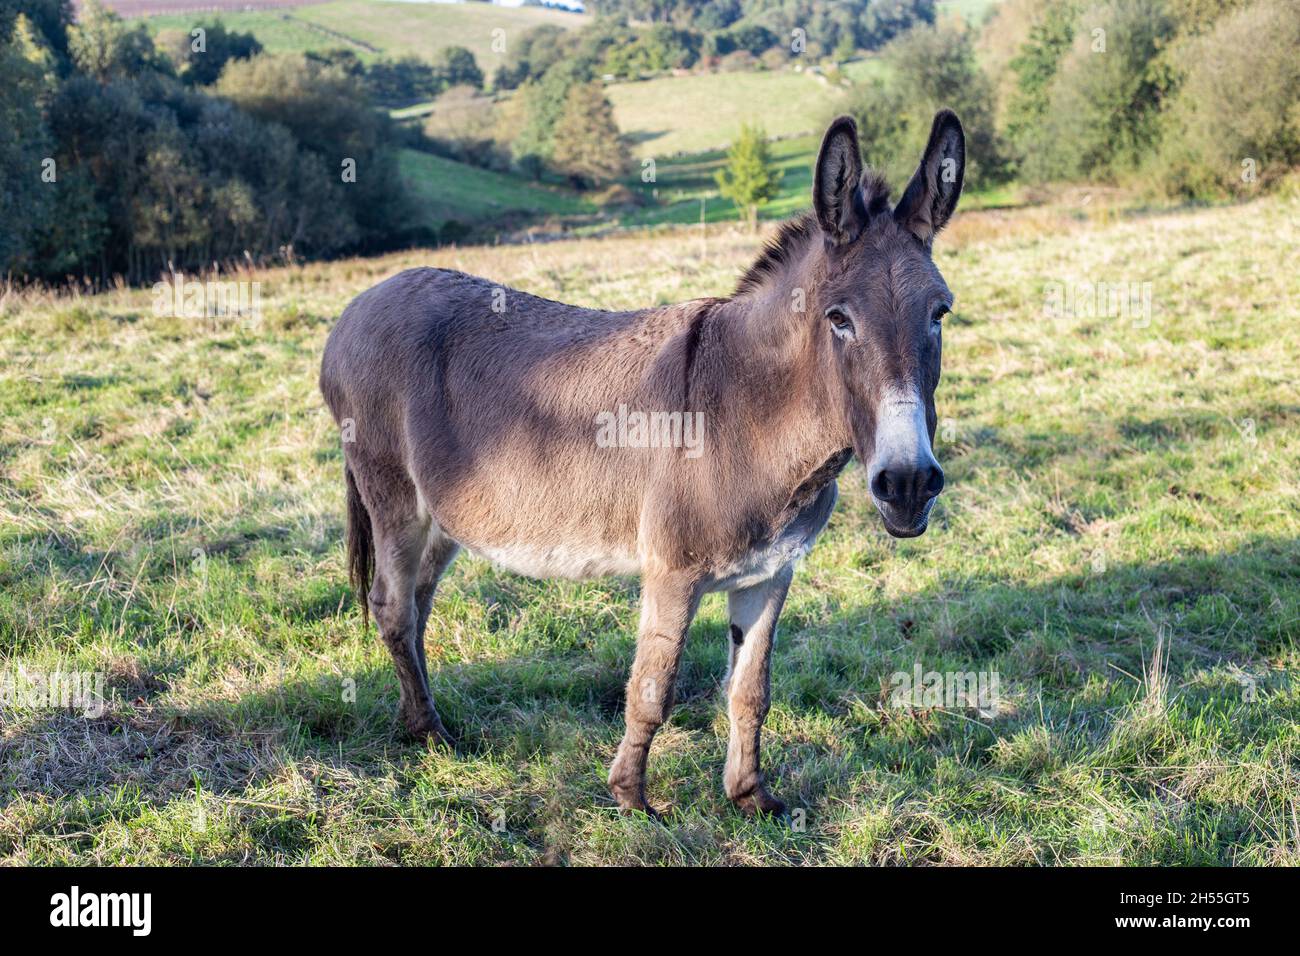 A portrait of a donkey looking at the camera. docile and relaxed animal. calm and confident. Stock Photo